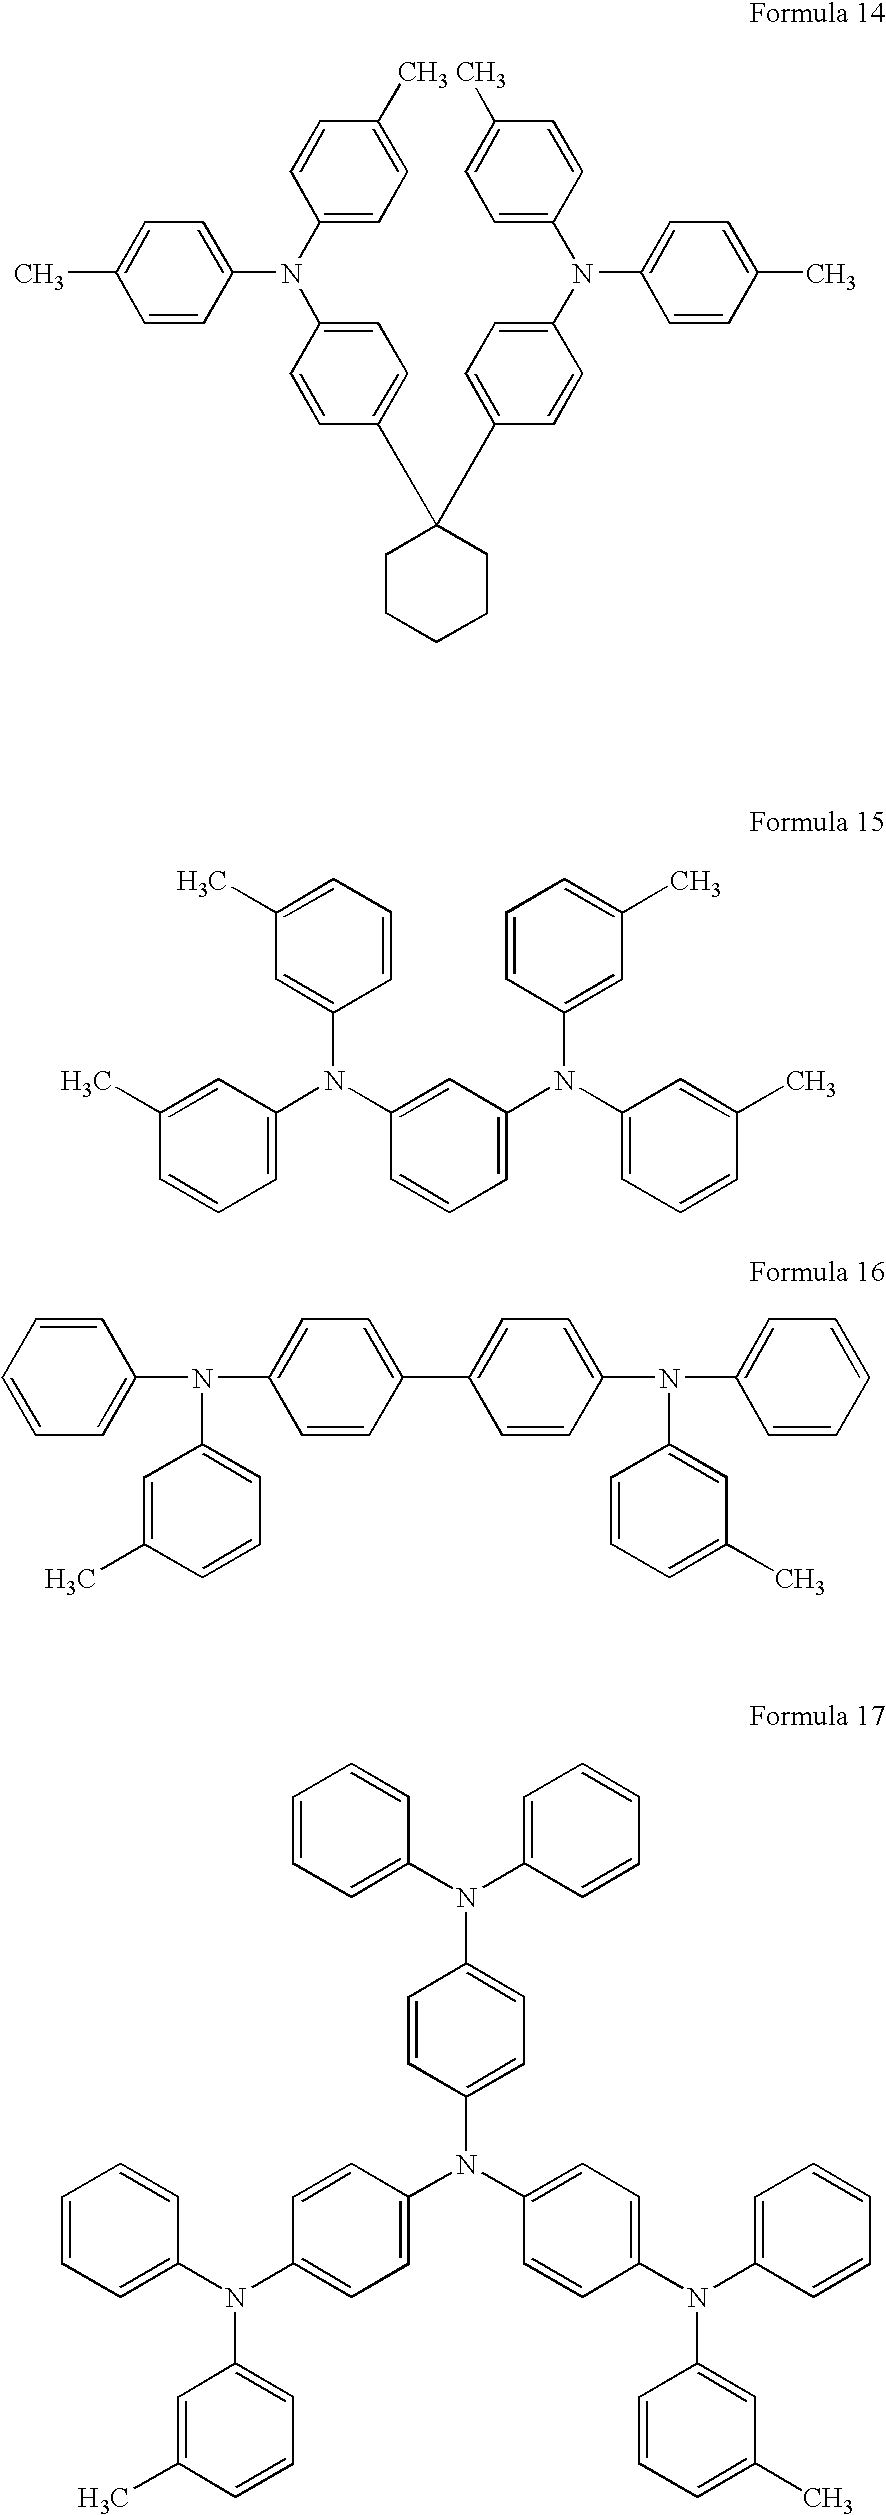 Donor film for low molecular weight full color organic electroluminescent device using laser induced thermal imaging method and method for fabricating low molecular weight full color organic electroluminescent device using the film